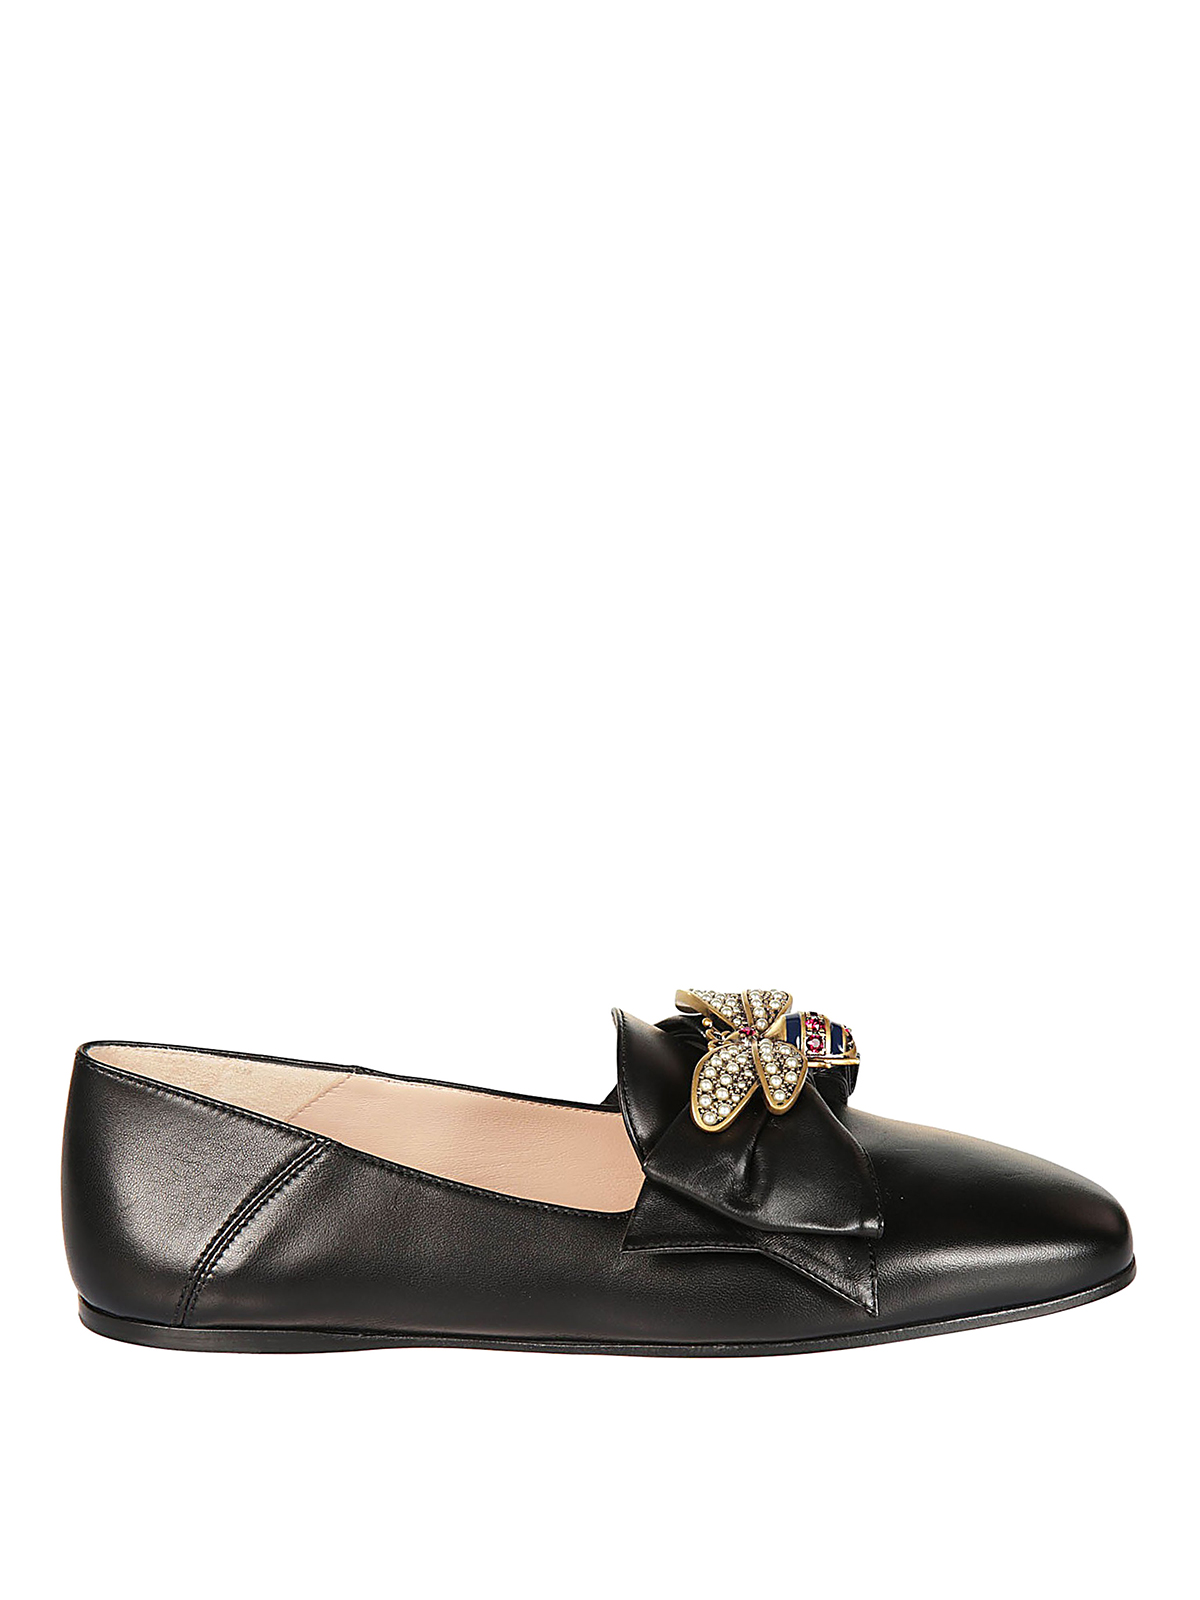 gucci leather ballet flat with bow